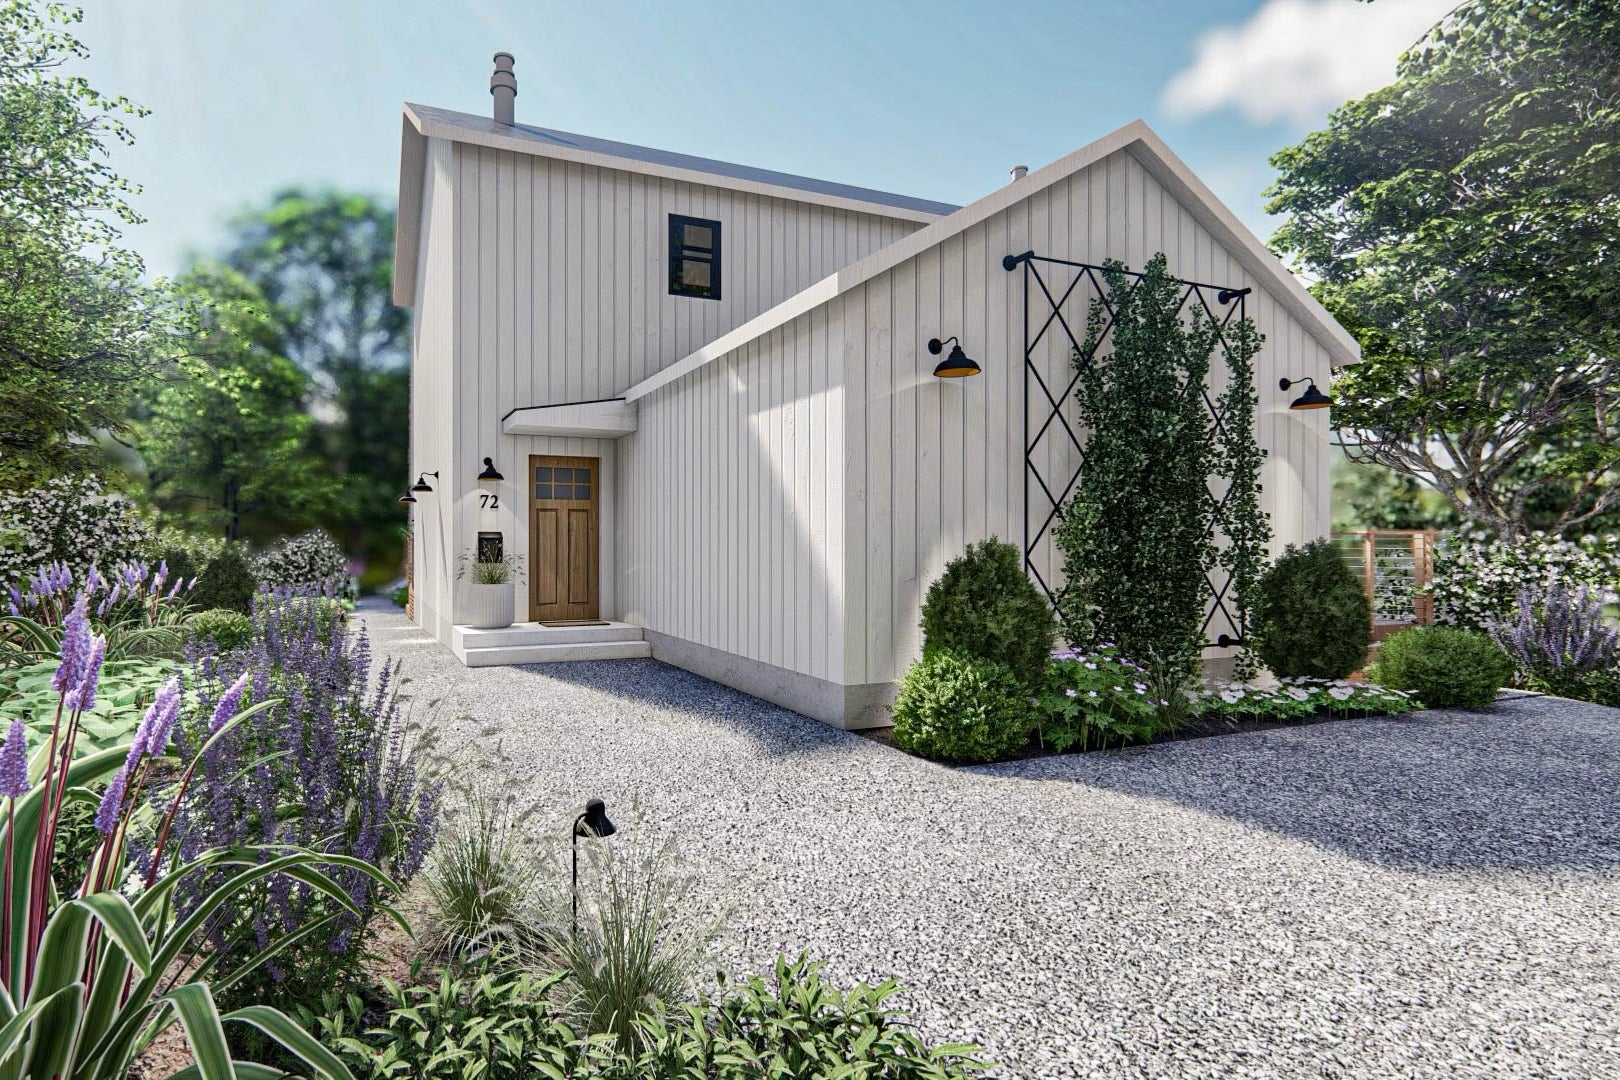 Rendering of an upstate home